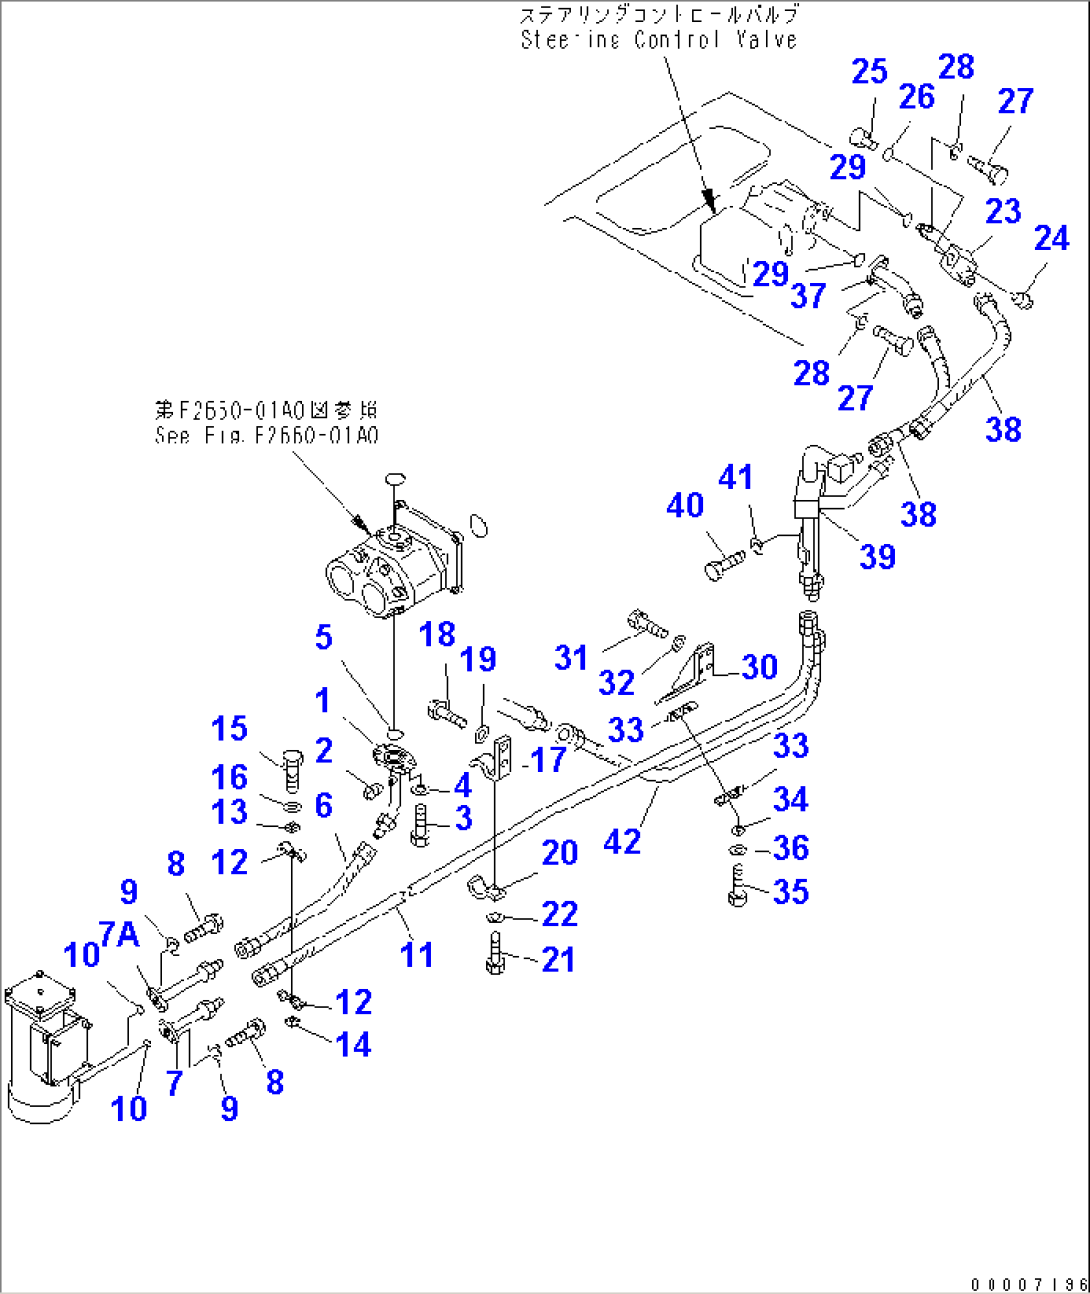 STEERING PIPING (FOR 140 ENGINE)(#31586-)